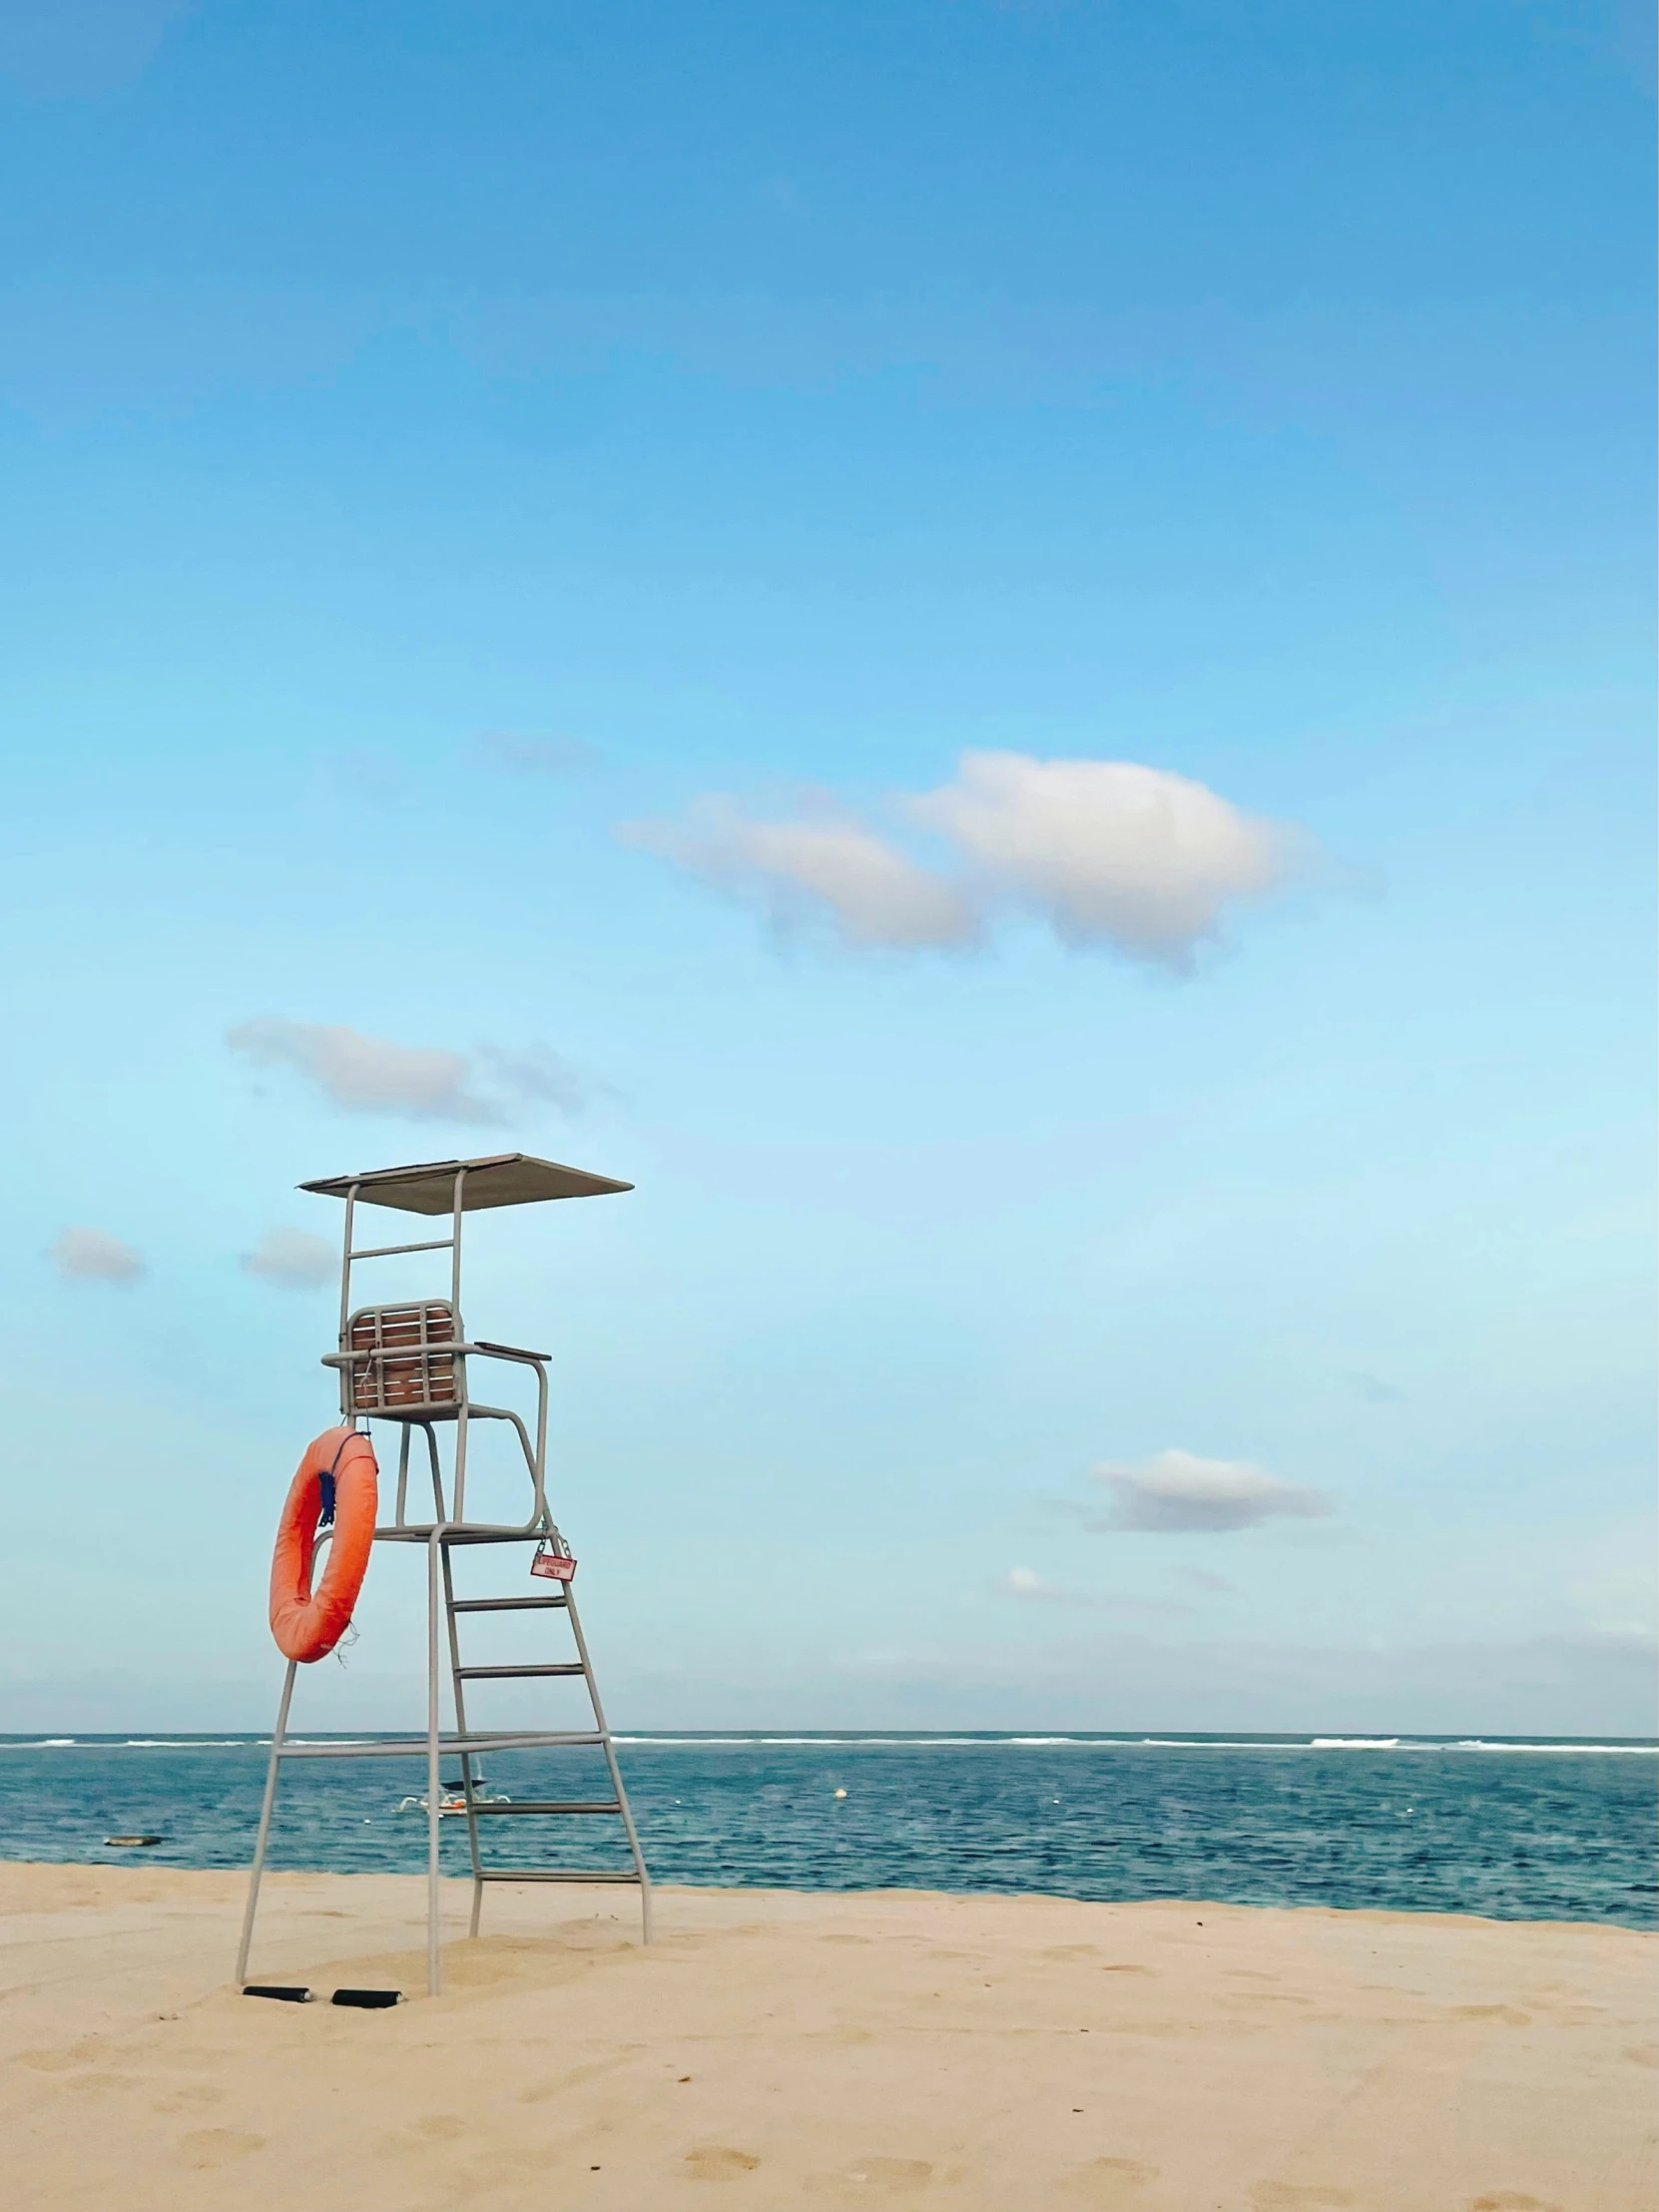 a lifeguard tower on the beach with an orange float